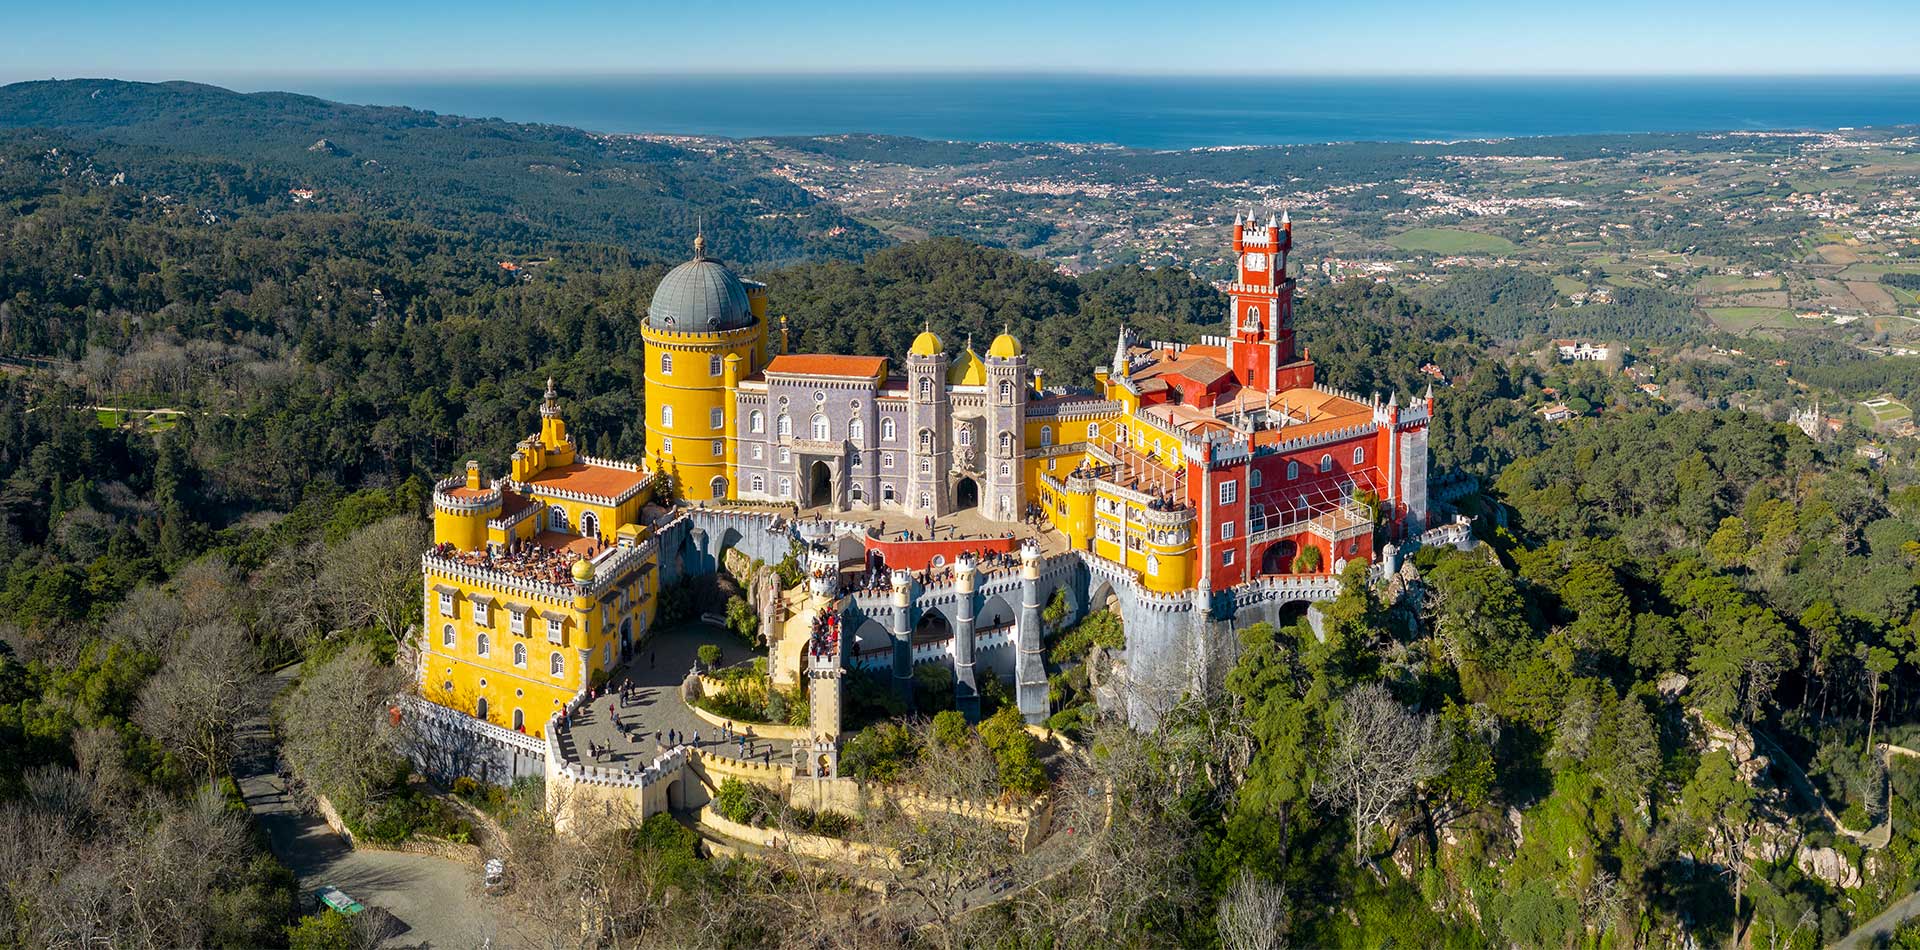 Pena Palace in the Sintra hills, Lisbon, Portugal